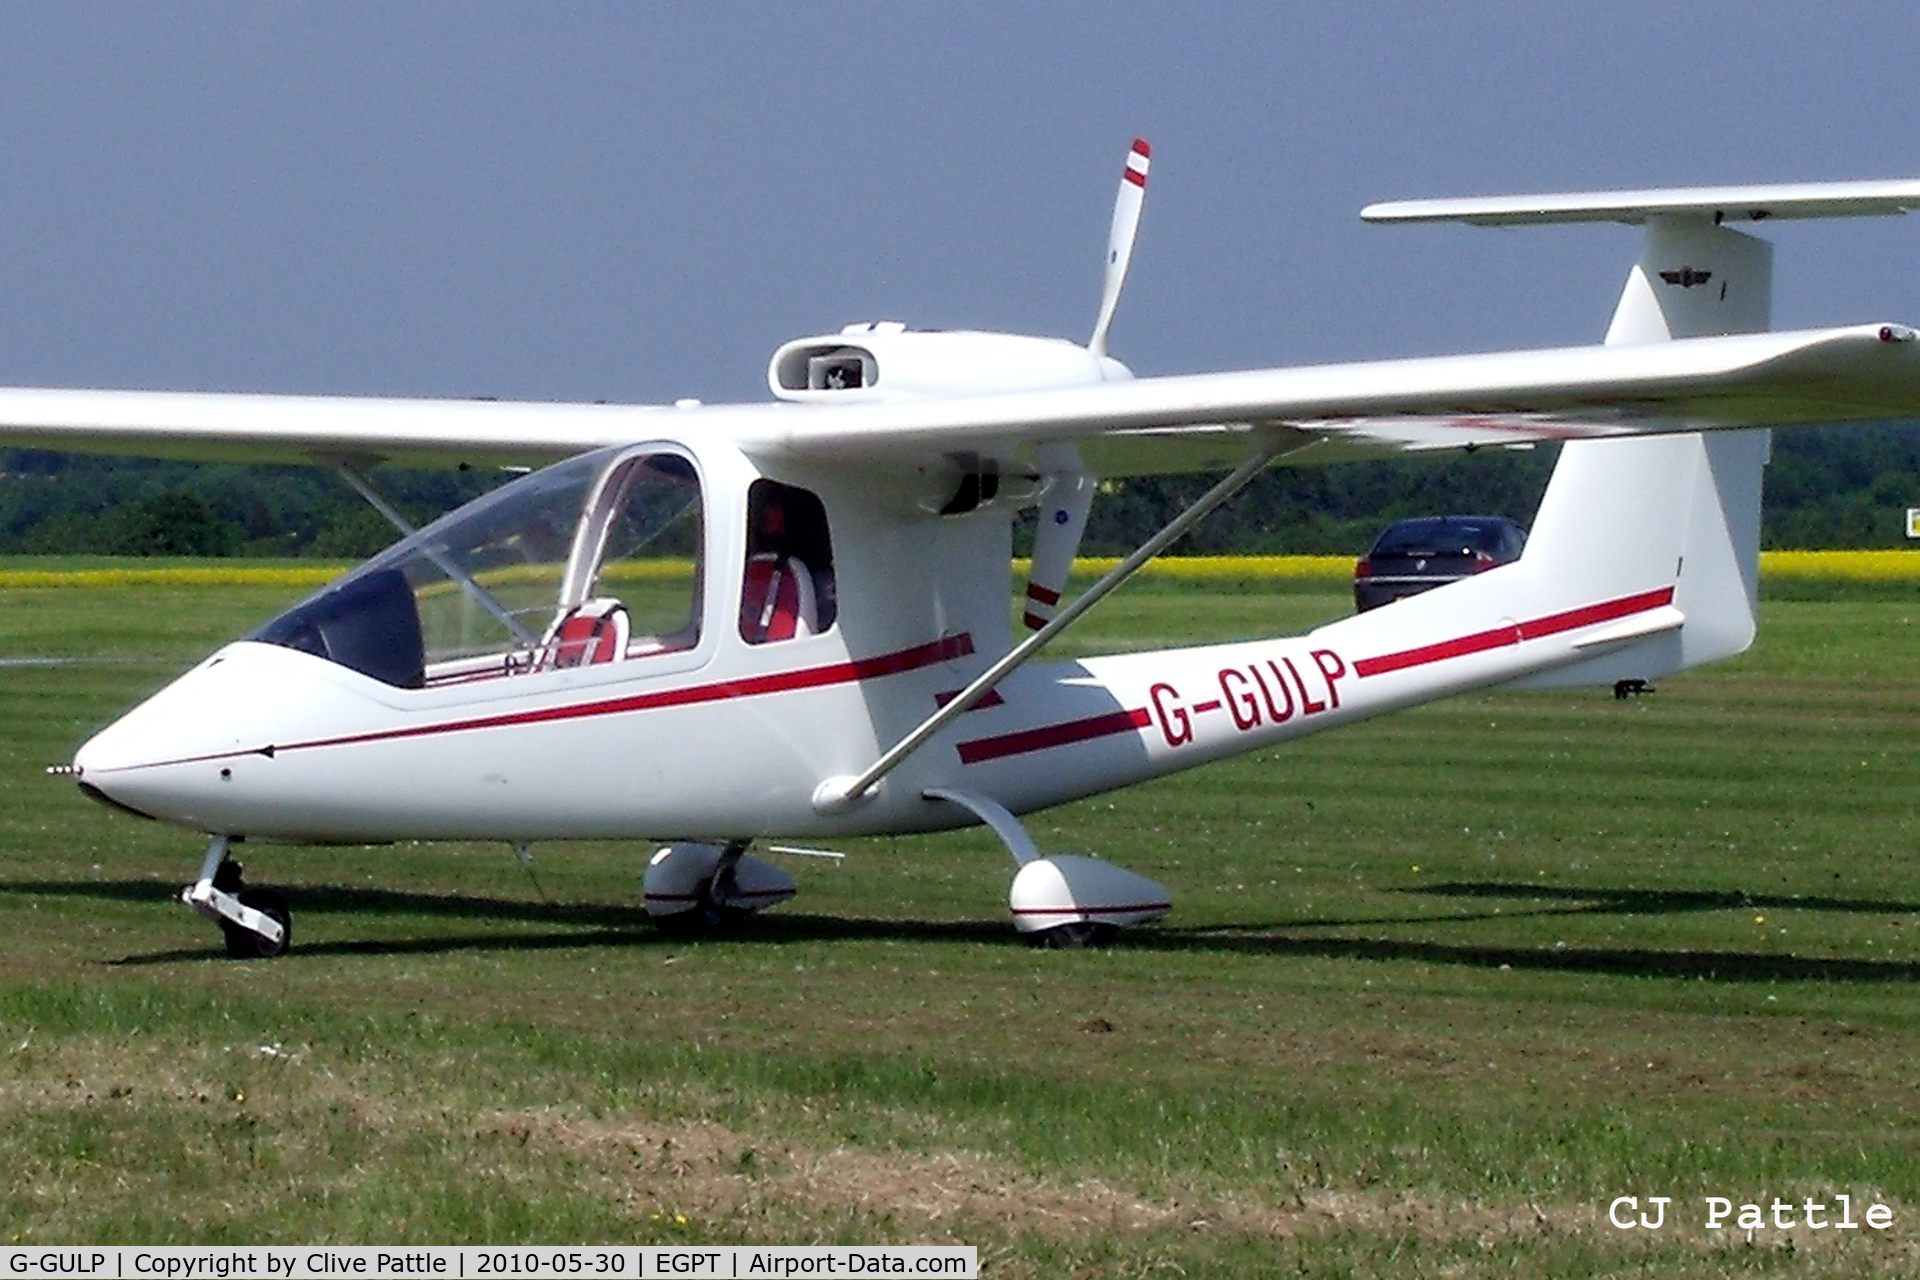 G-GULP, 2002 Iniziative Industriali Italiane Sky Arrow 650T C/N PFA 298-13664, On display in the static park during the Heart of Scotland Airshow held at Perth (Scone) airfield EGPT